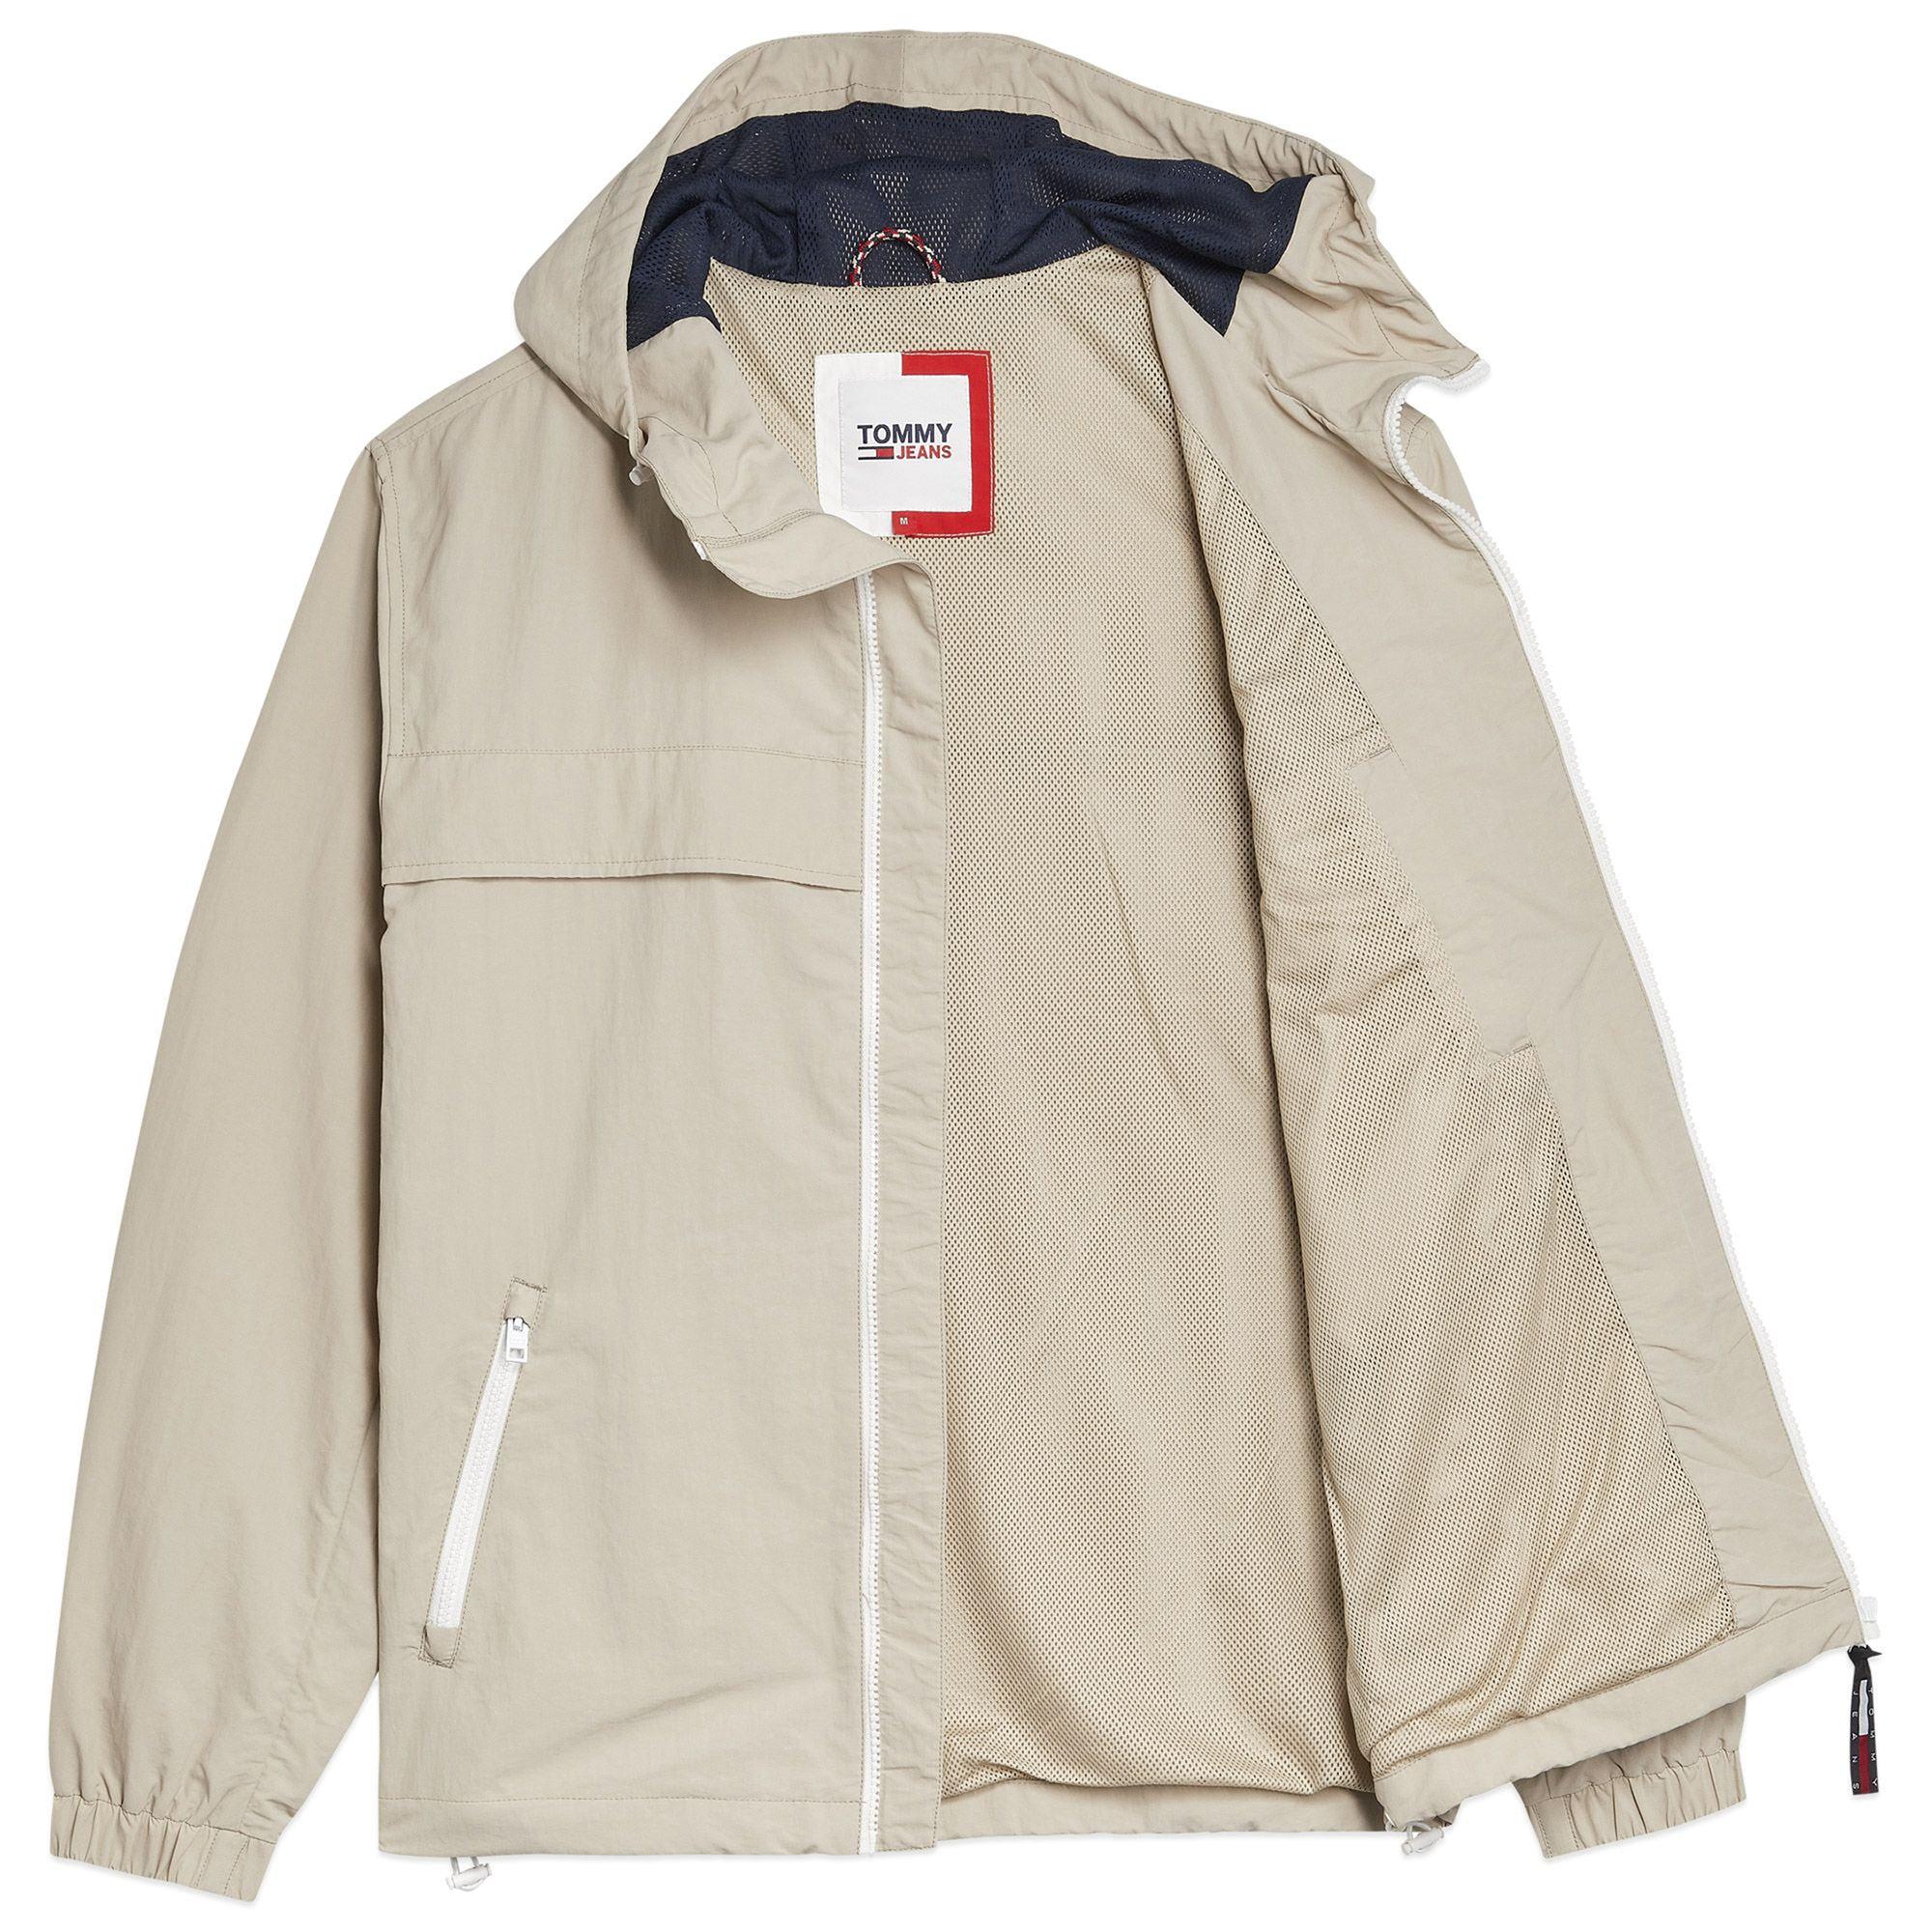 Lyst | Hilfiger Tommy Natural in Tommy Men Jeans for Chicago Windbreaker